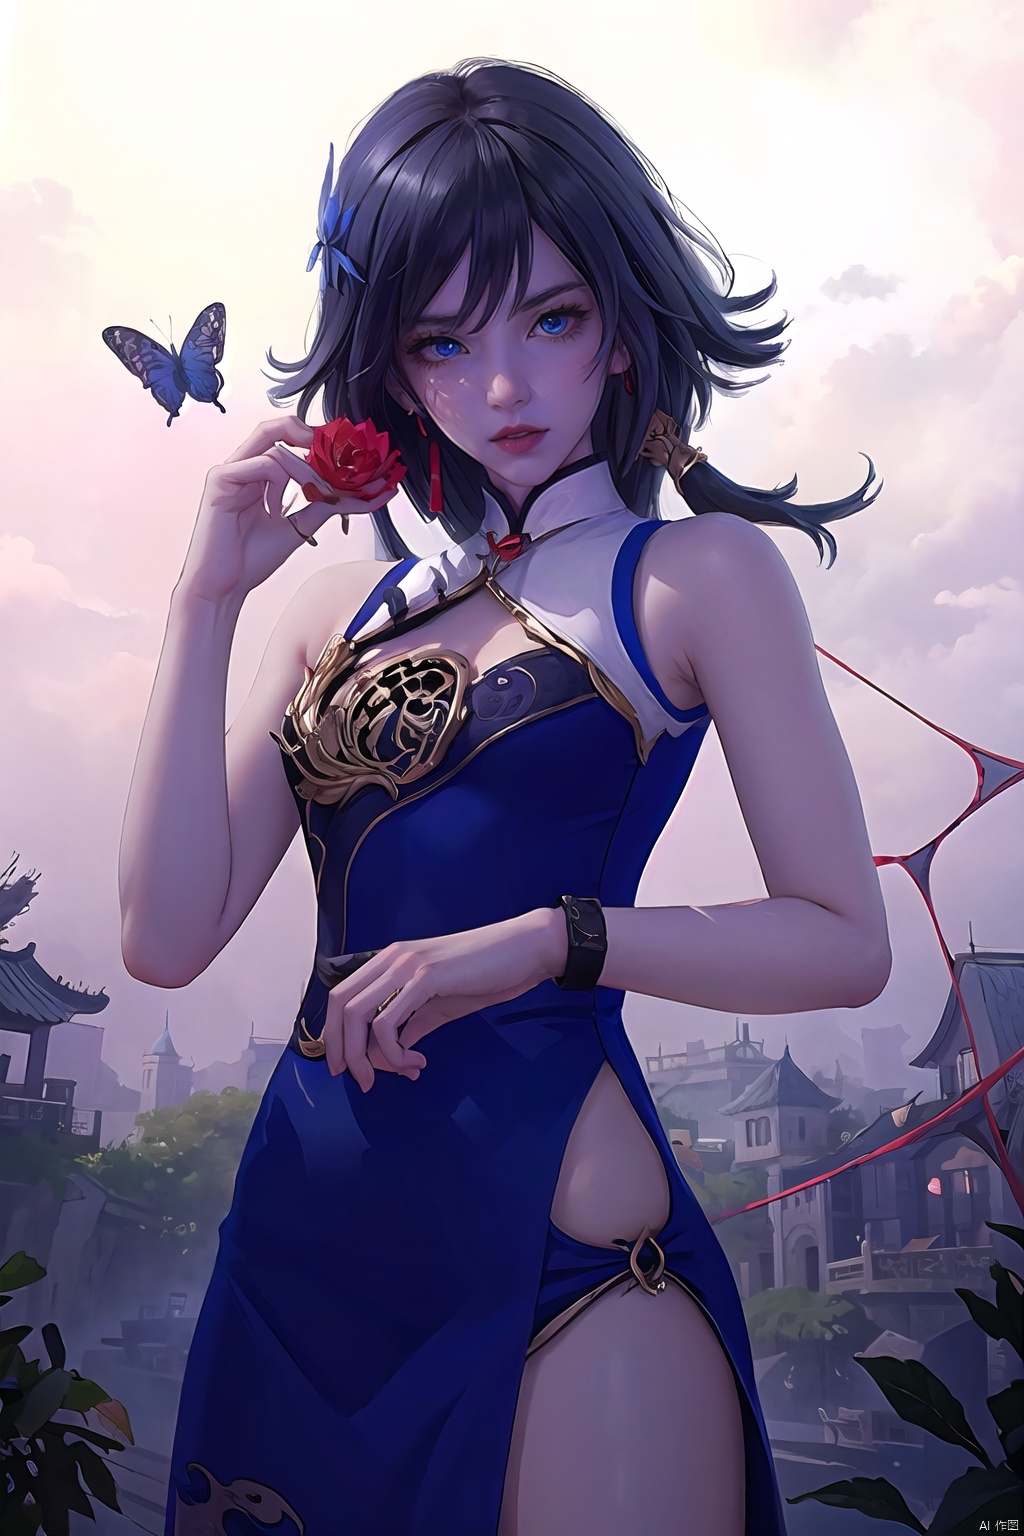  best,8k,UHD,masterpiece,bright ,high quality,flat color,1girl,
//////////////
Anime girl holding a red lotus flower. There are white butterflies and black butterflies flying around her, and there is a cobweb on her arm. The background is dark with many black leaves scattered around.
\\\\\\\\\\\
“Girl_in_the_Spider’s_Web”
white_and_purple_butterfly_accessories
black_spider_tattoo
white_butterflies
cobweb_background
gothic
surreal
fantasy
manga
dark_romantic
\\\\\\\\\\\\\\
qingyan,1girl,fu hua,chinese clothes,blue eyes,short china dress,lhair ornament,black hair,bangs,bare hands,sleeveless,blue eyes, guzhuang